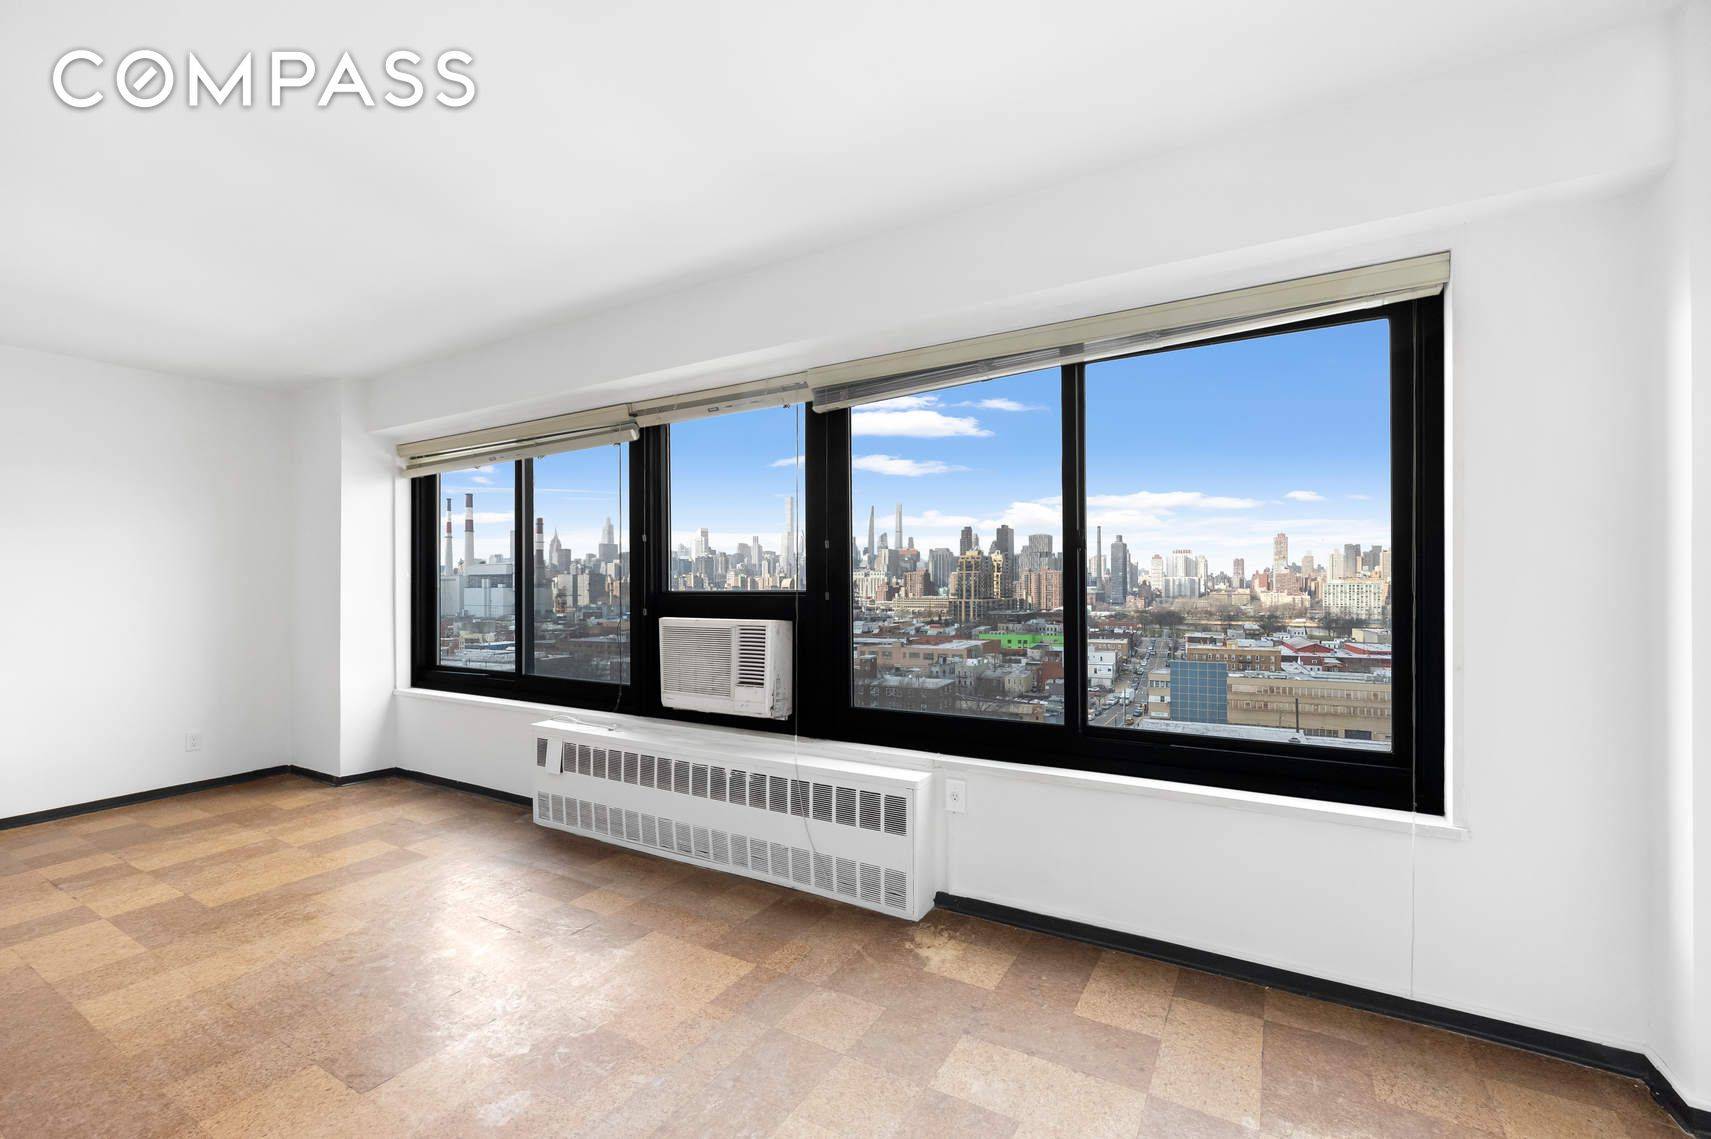 Bask in the beautiful, unobstructed views of the Manhattan skyline from this top floor corner apartment.